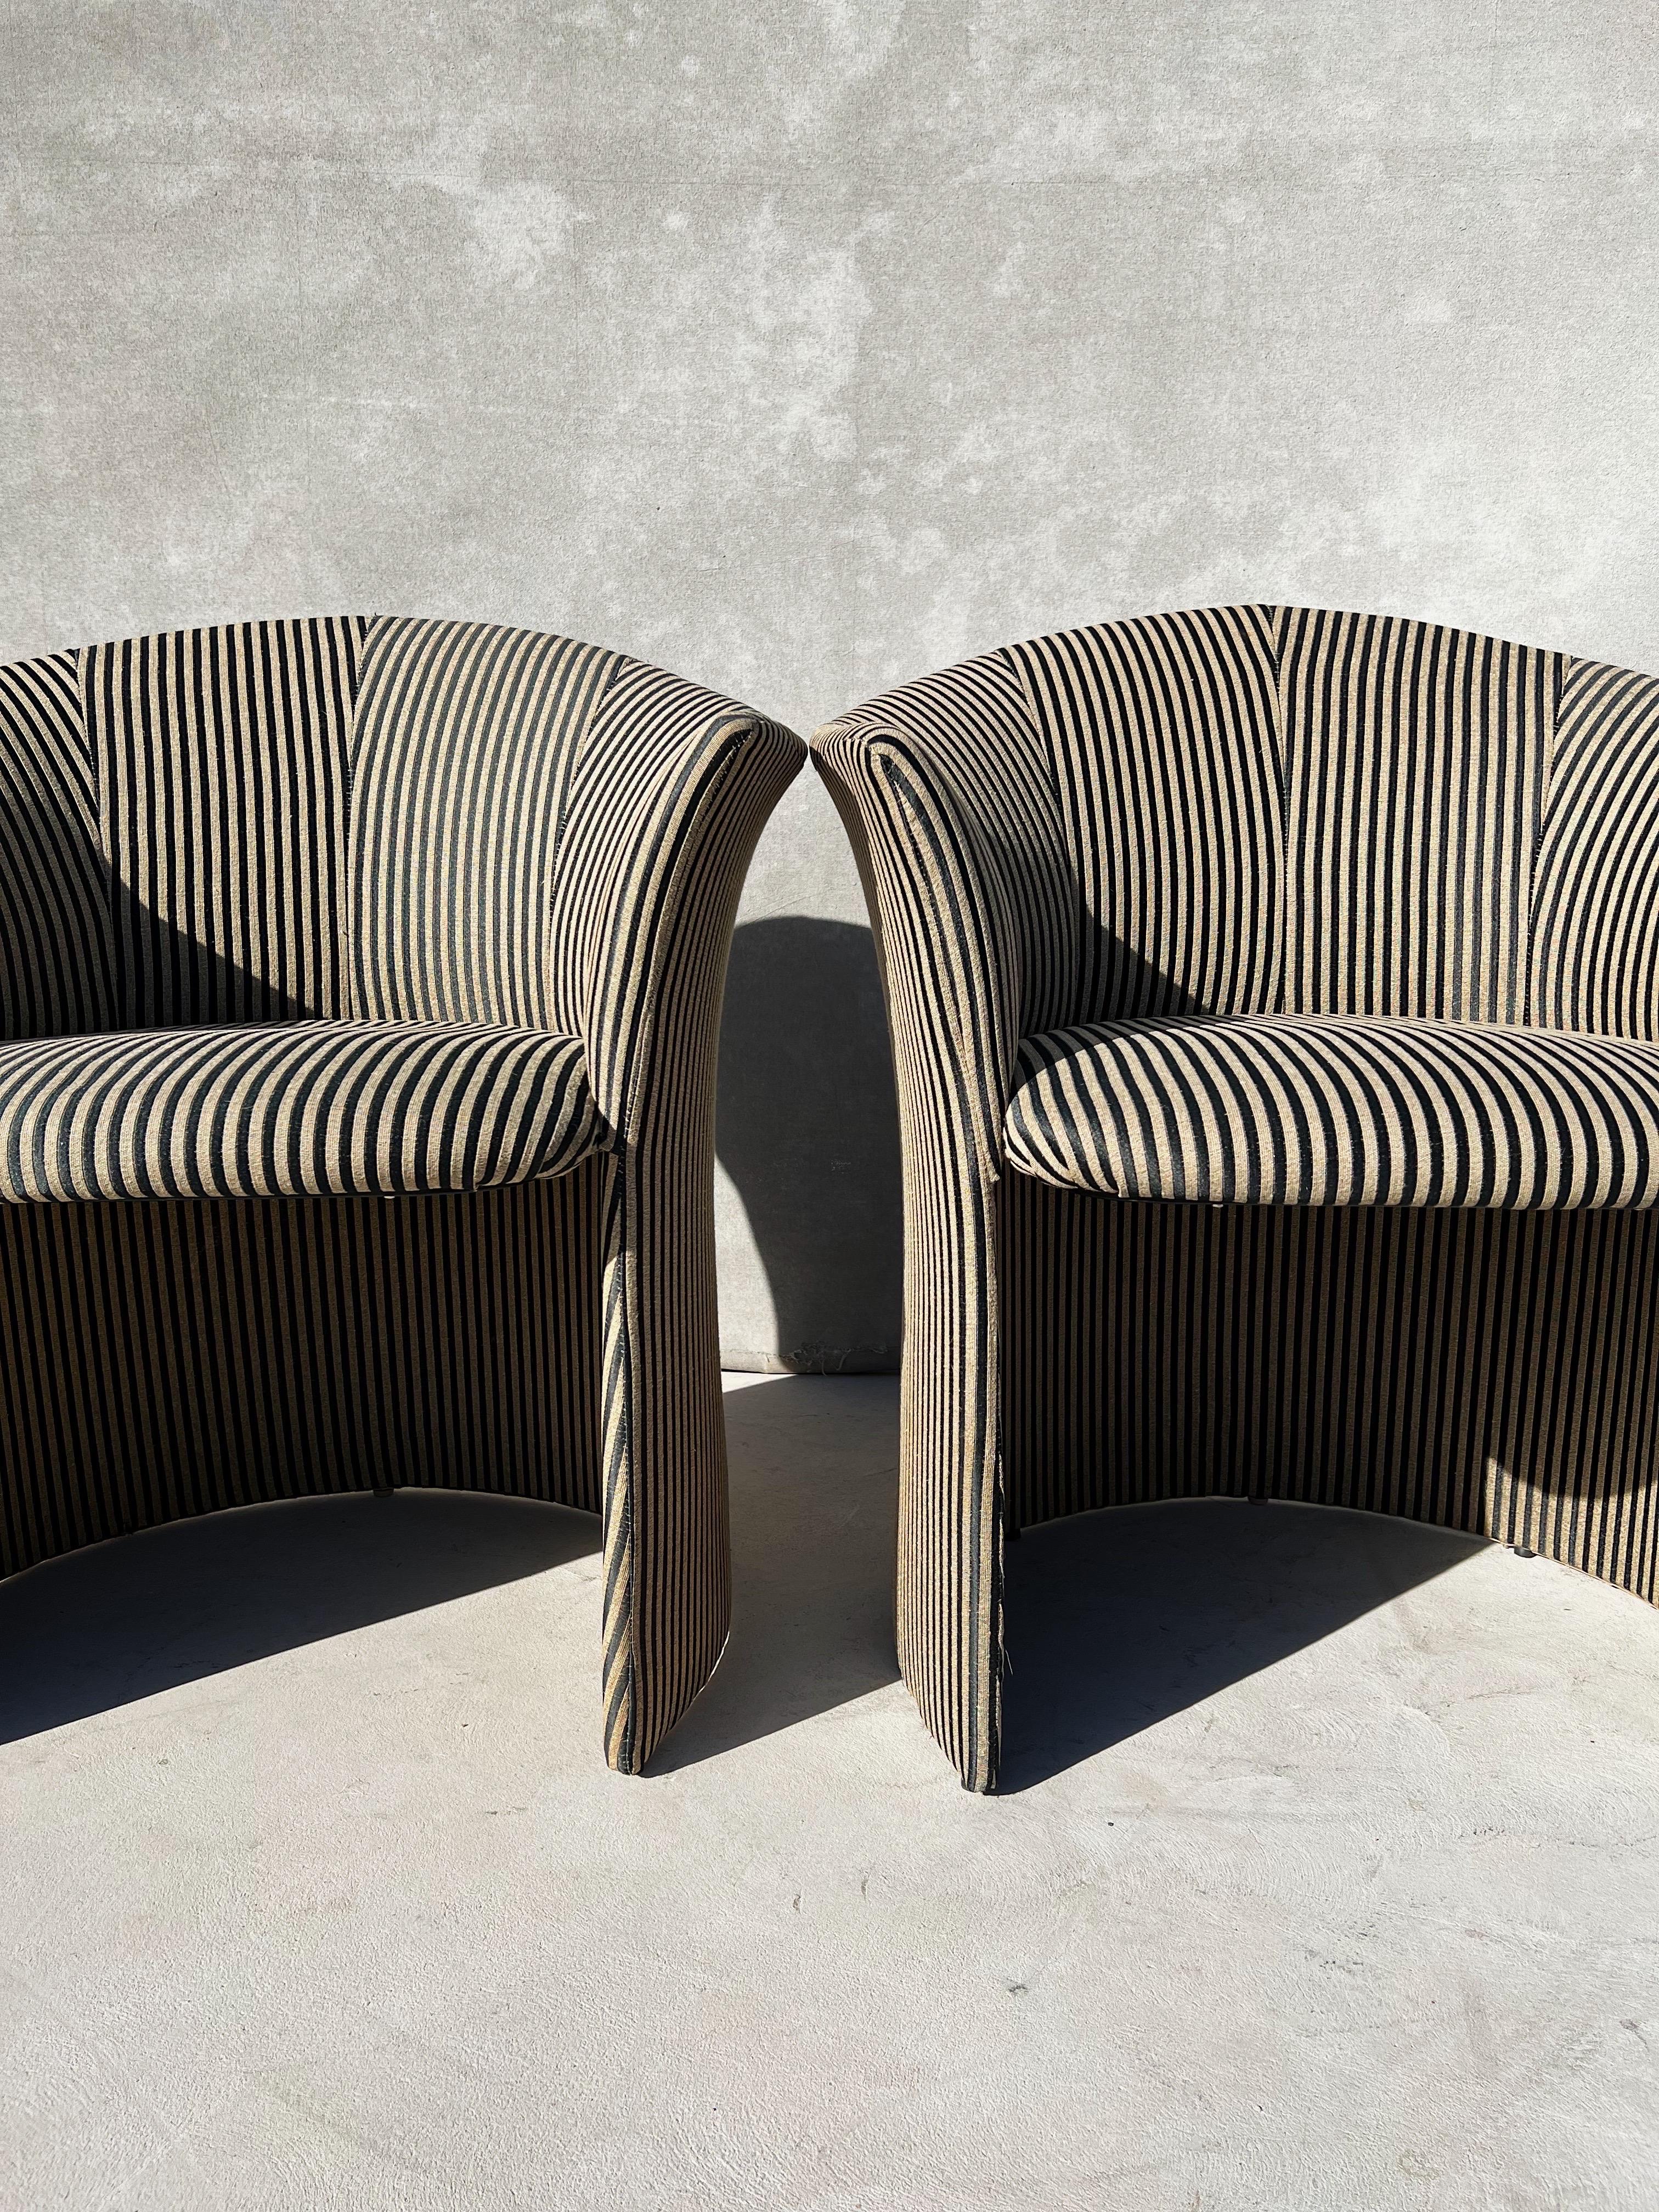 Vintage Pair of Striped Chairs, Attributed to Roche Bobois  2